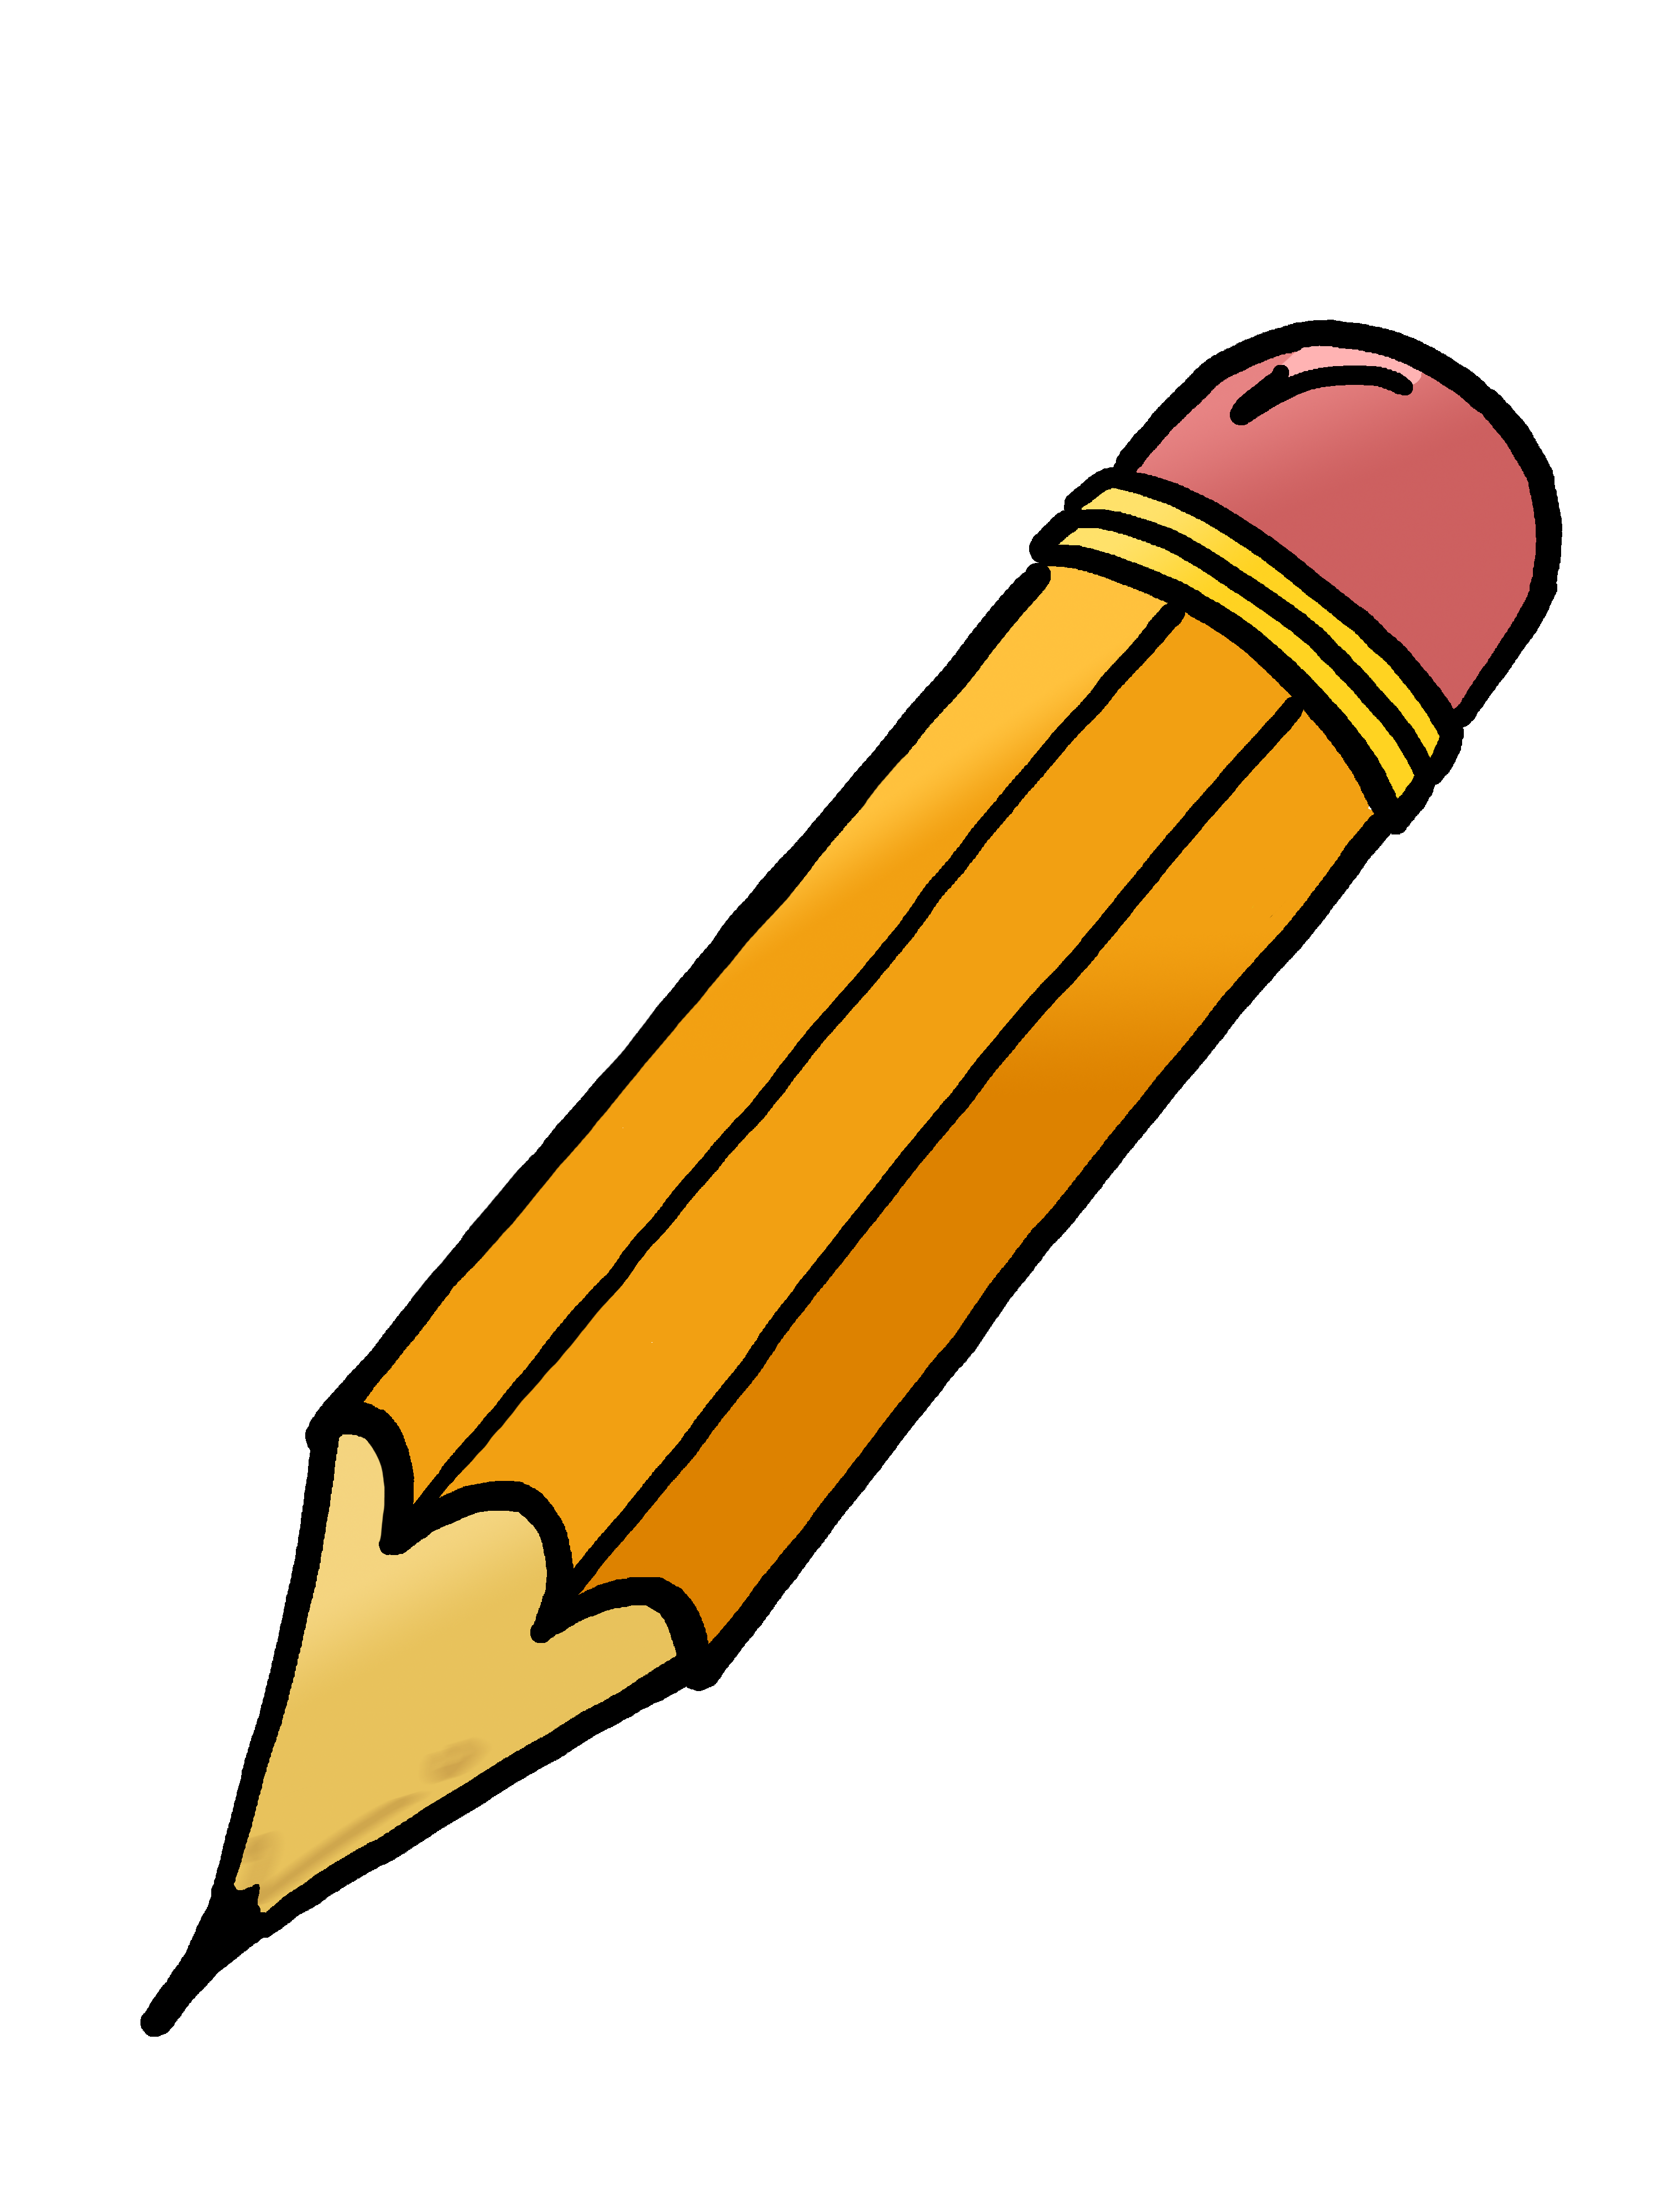 Pencil Clip Art PNG Transparent Background, Free Download #684 -  FreeIconsPNG